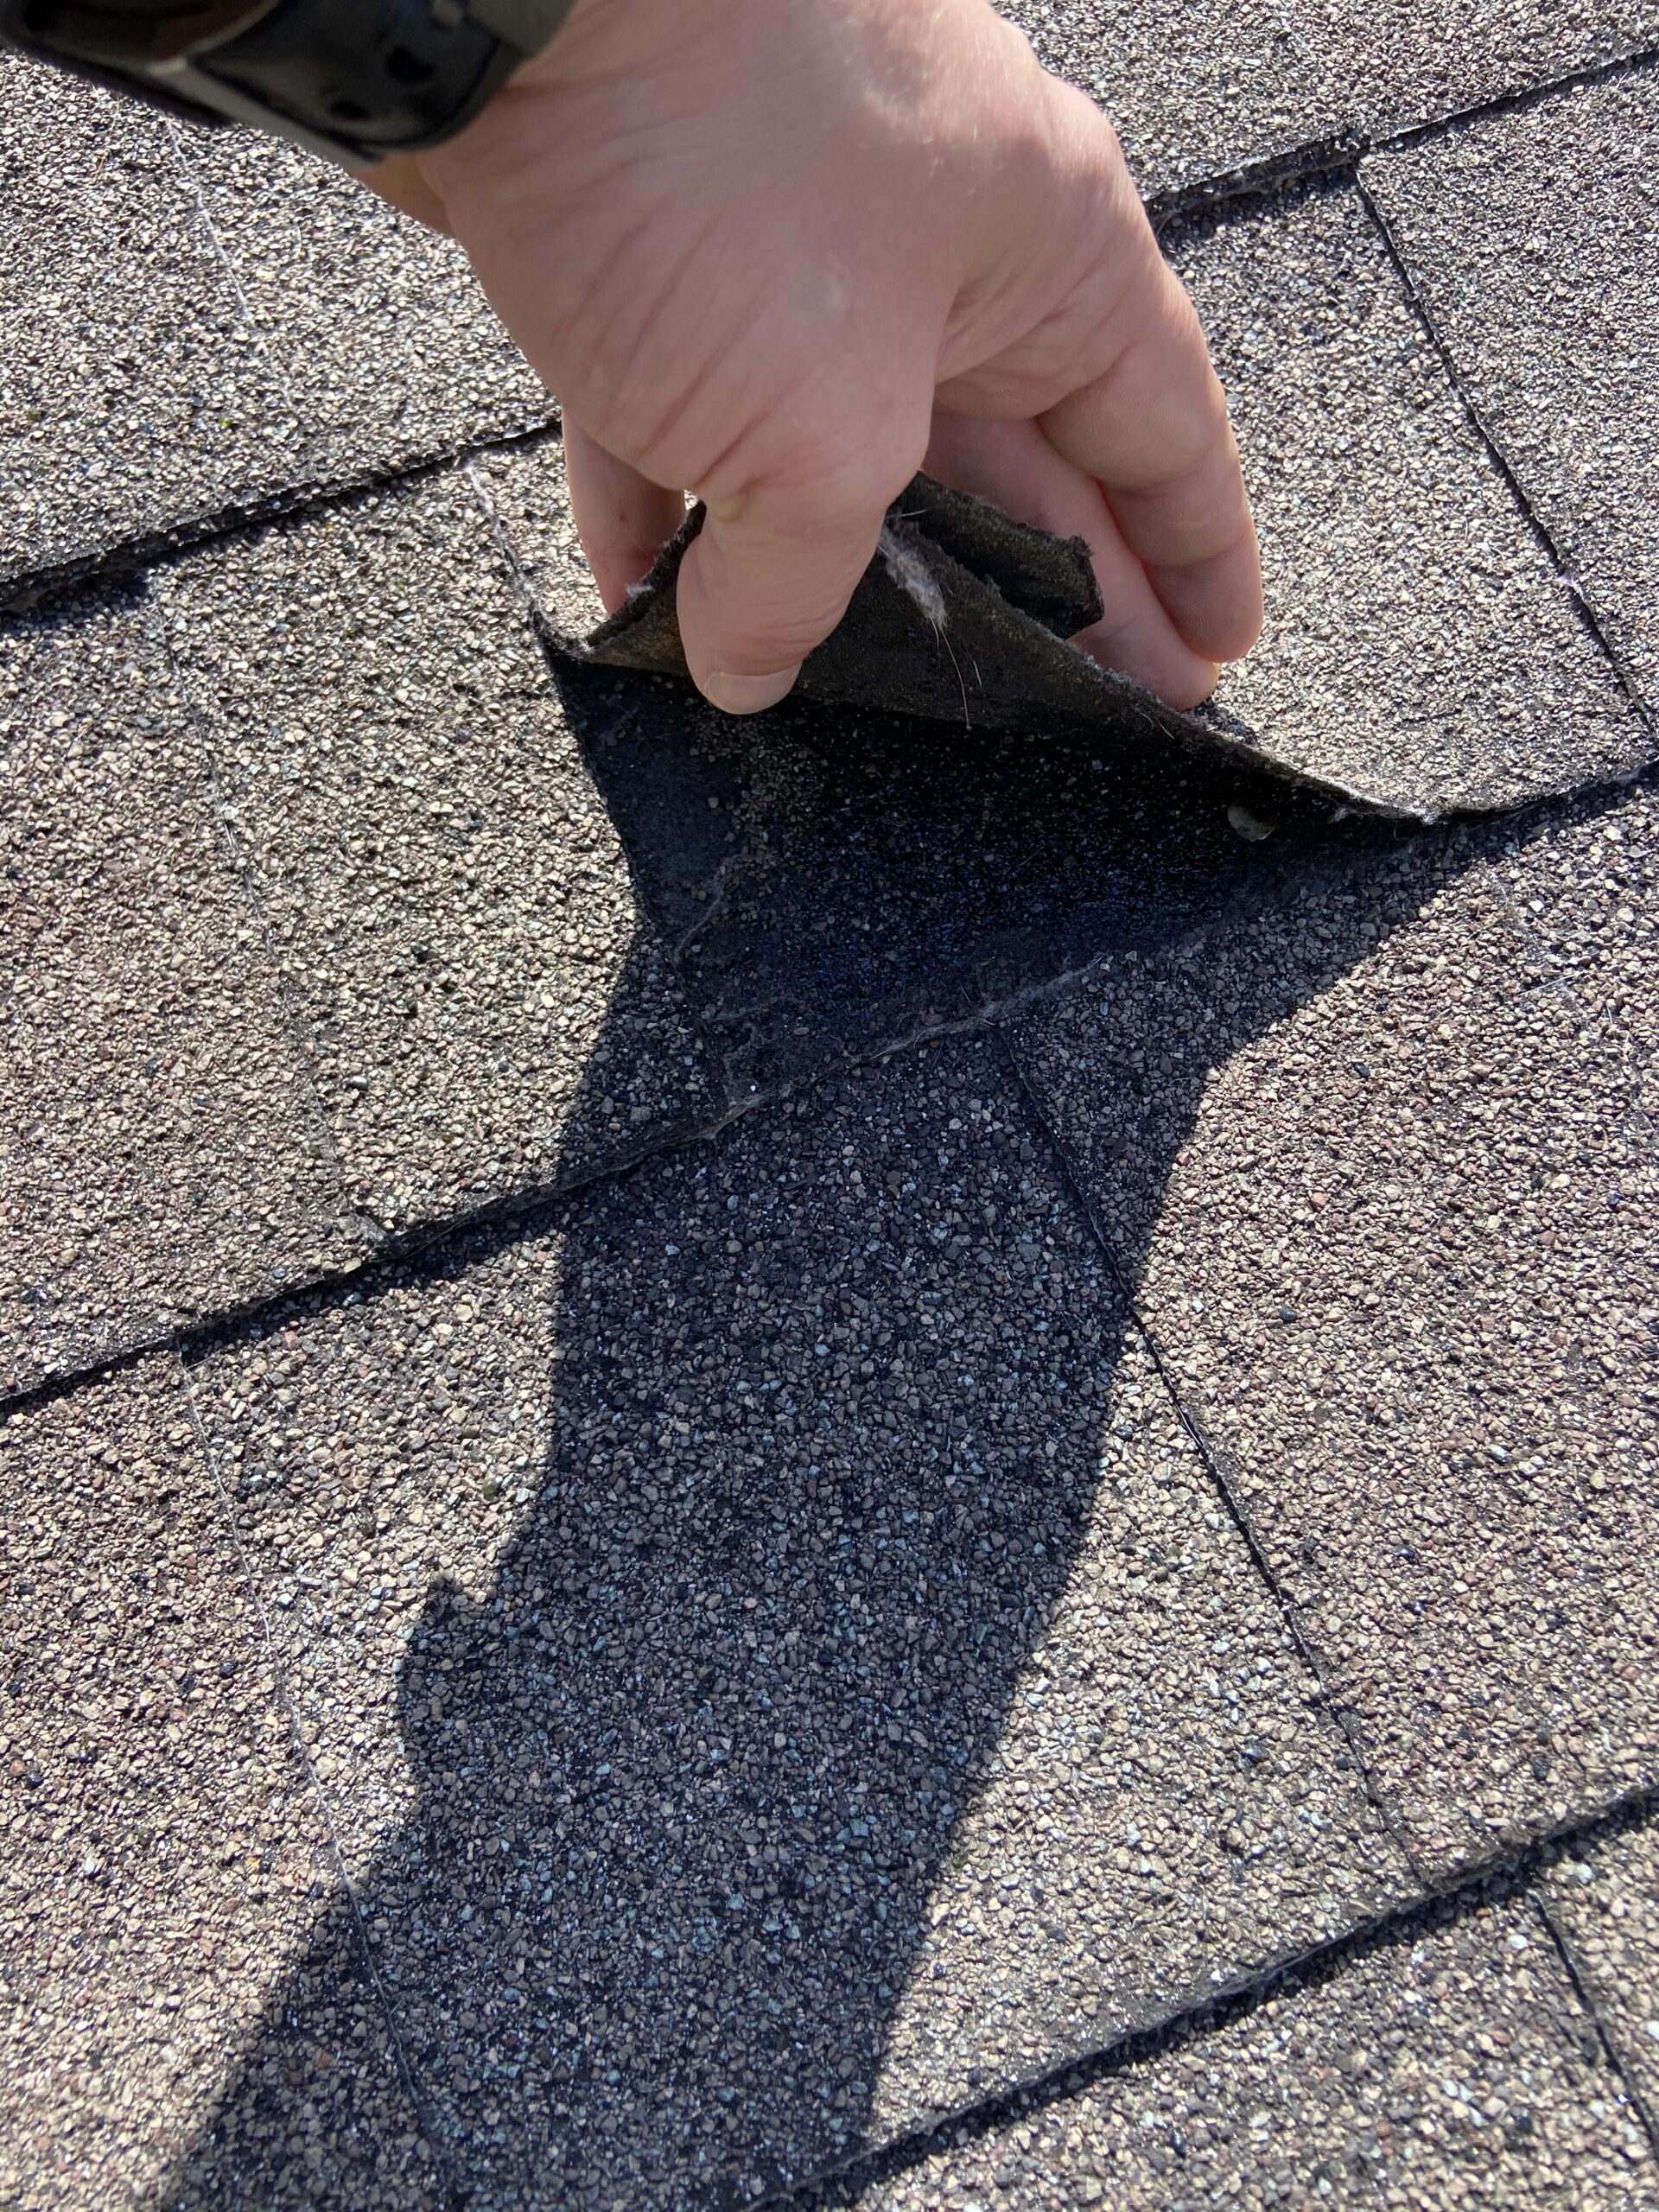 This is a picture of a nail that is misplaced too close to the union of two shingles on a roof